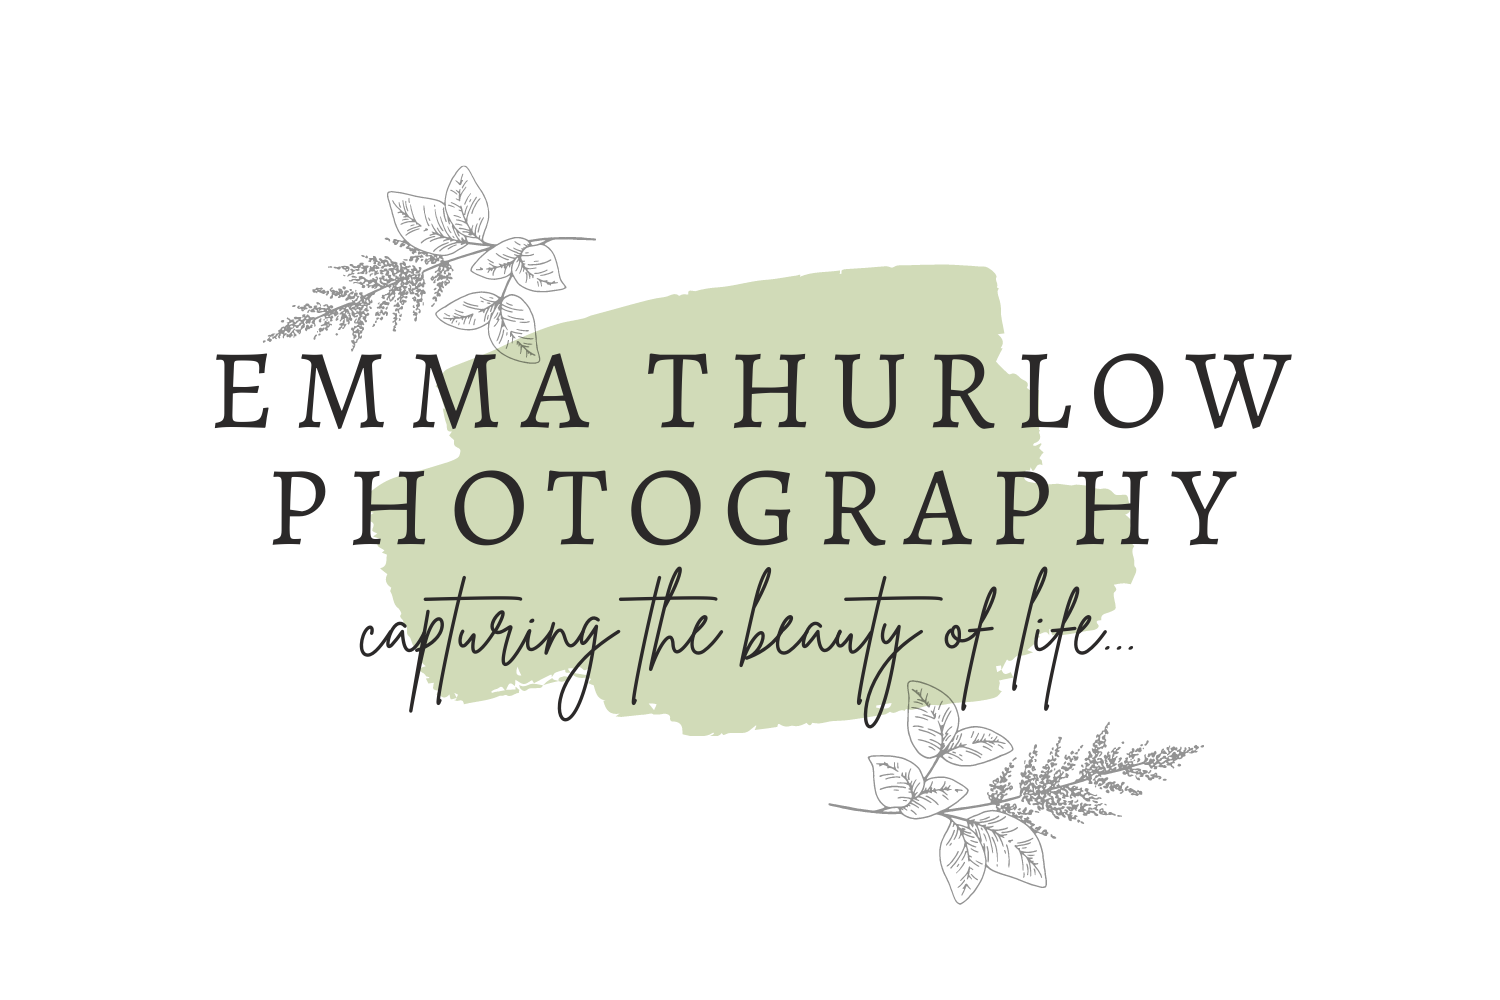 Logo reads Emma Thurlow Photography - capturing the beauty of life